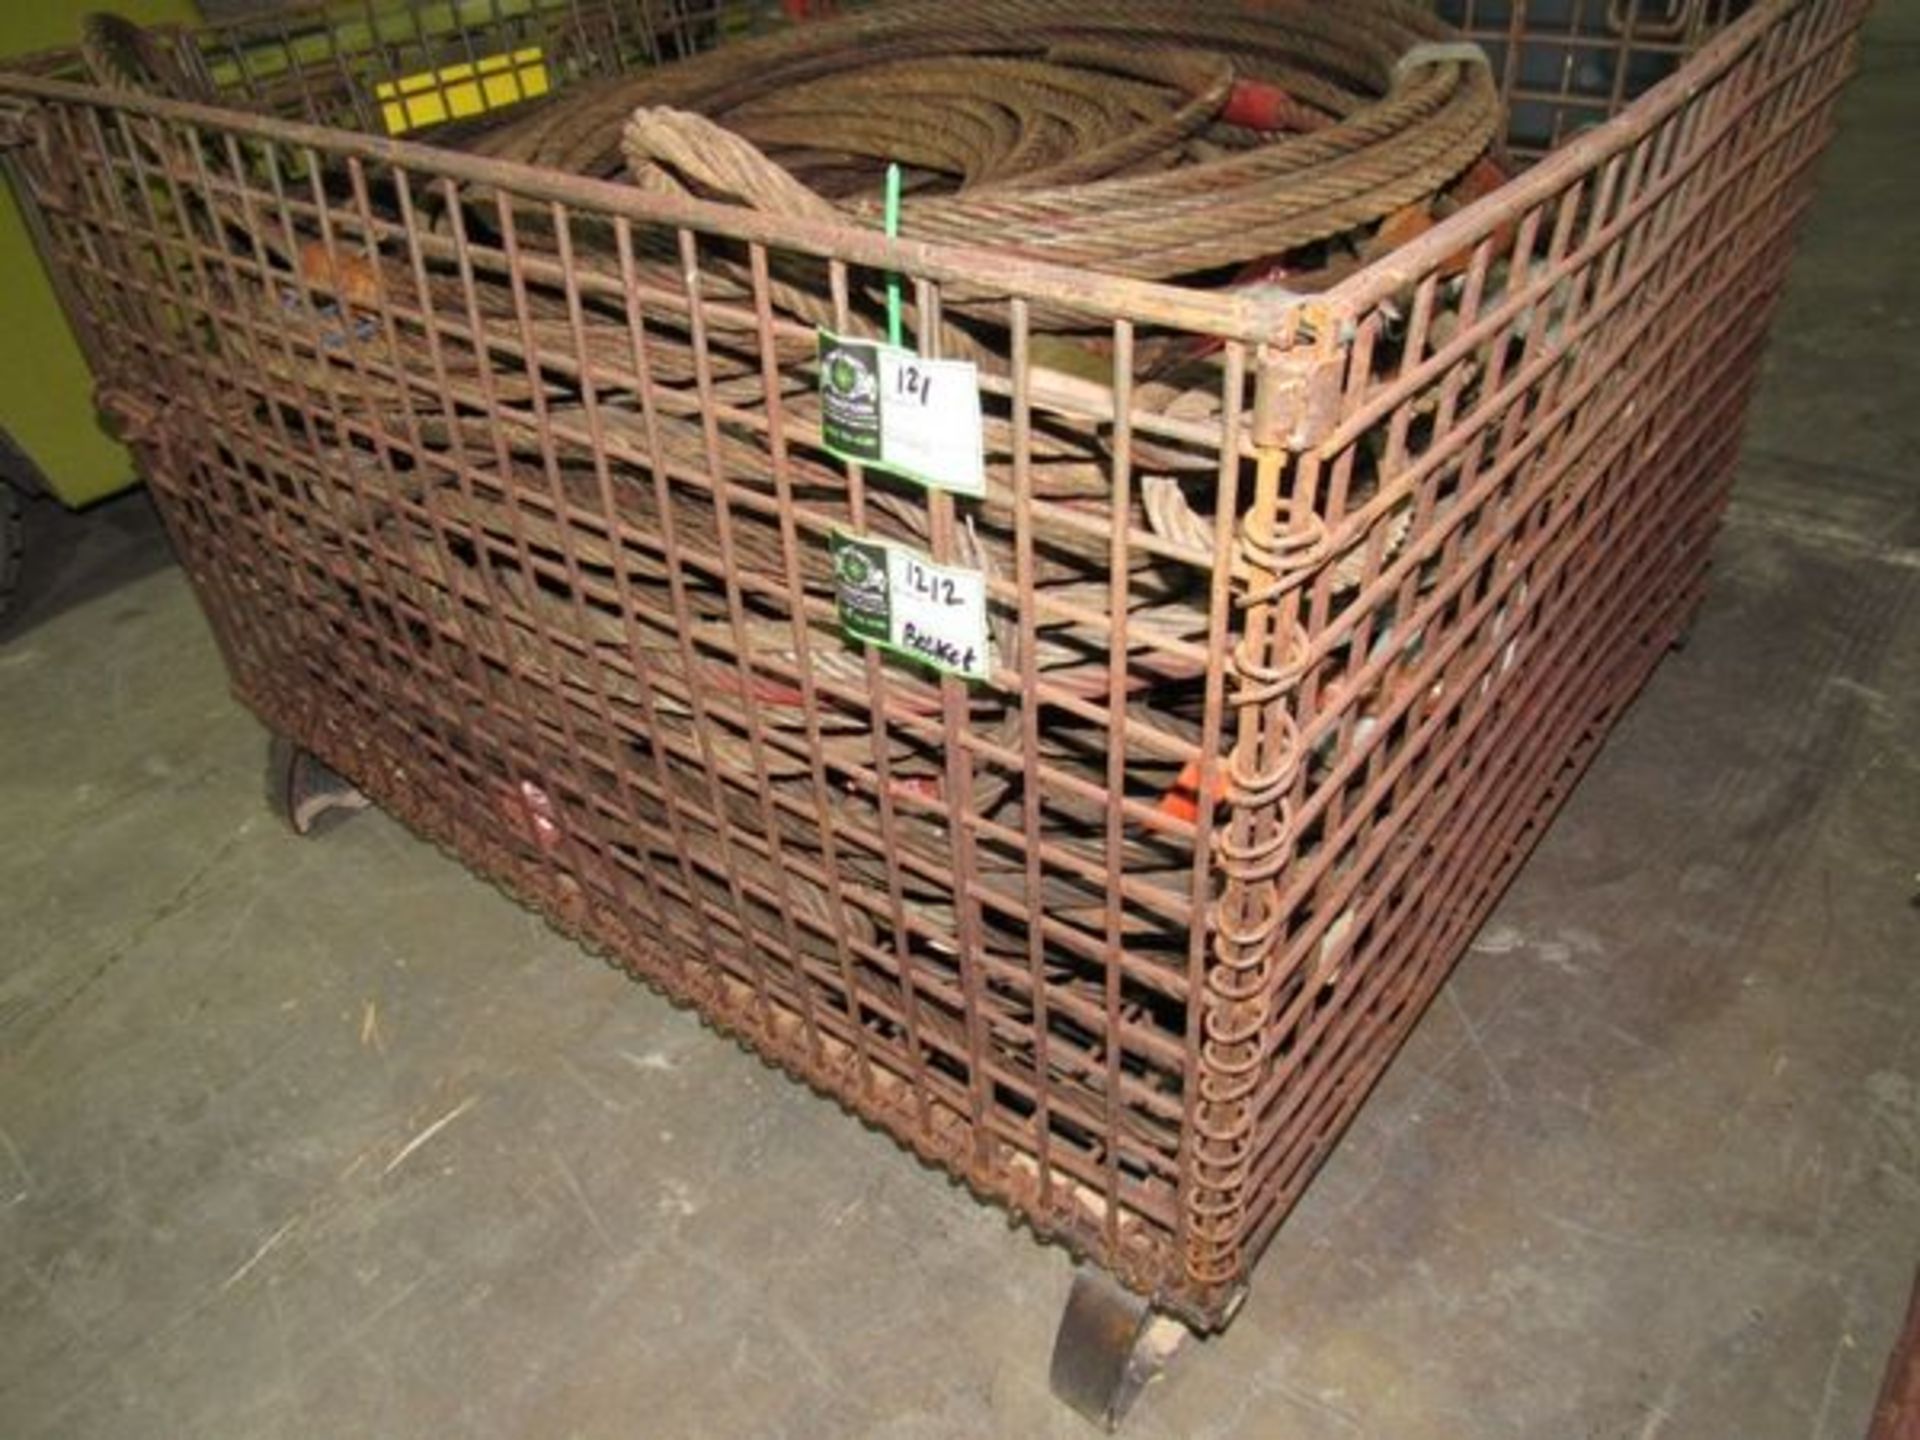 Warehouse Basket- MFR - Unknown 48" x 40" x 31" **Contents SOLD Separately in Lot #1211** - Image 2 of 8